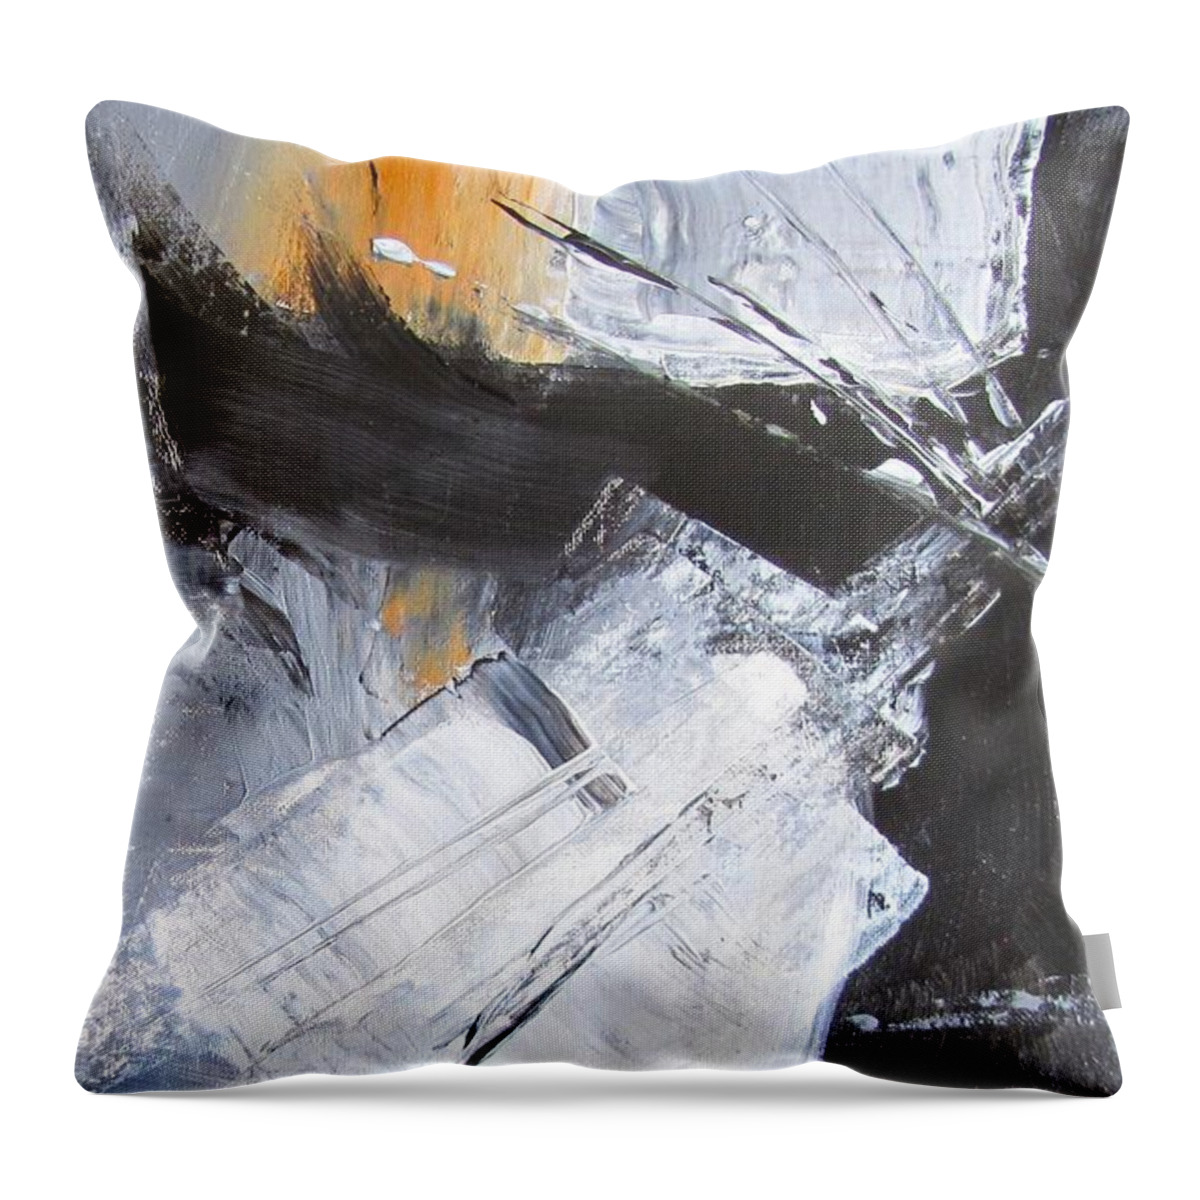 Rust Throw Pillow featuring the painting Life's Cross Roads by Barbara O'Toole